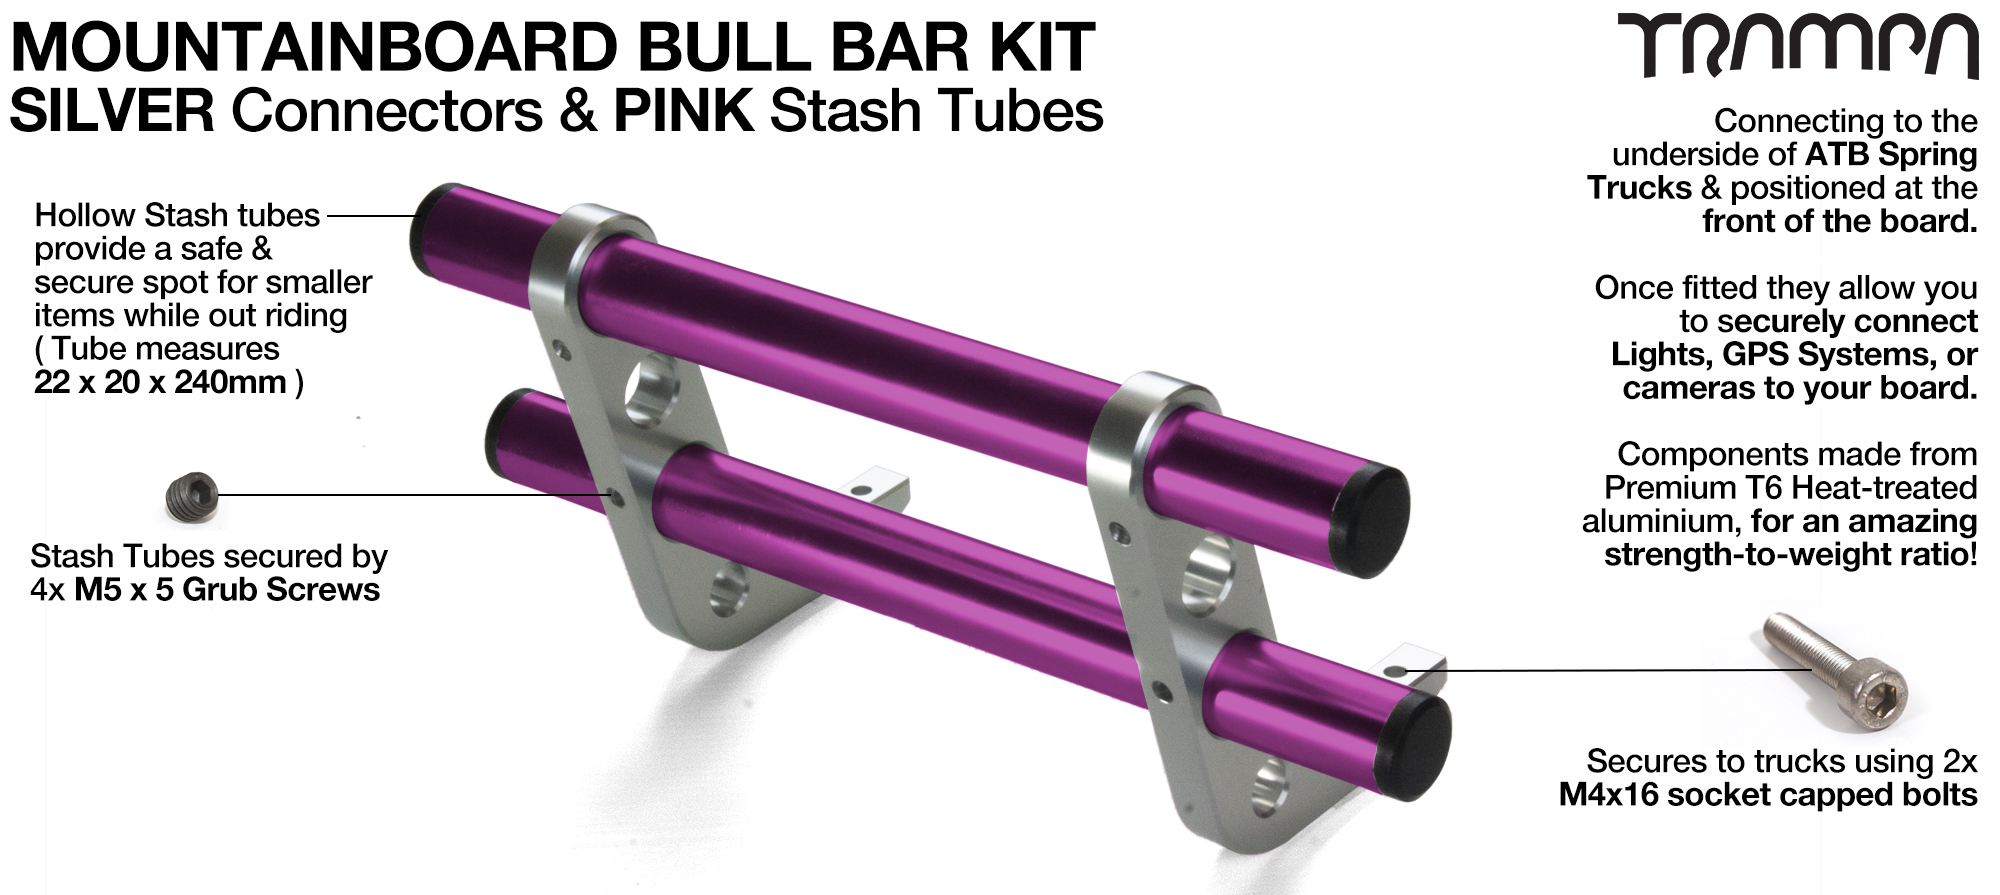 SILVER Uprights & PINK Crossbar BULL BARS for MOUNTAINBOARDS T6 Heat Treated CNC'd Aluminium Uprights, with Hollow Aluminium Stash Tubes with Rubber end bungs 